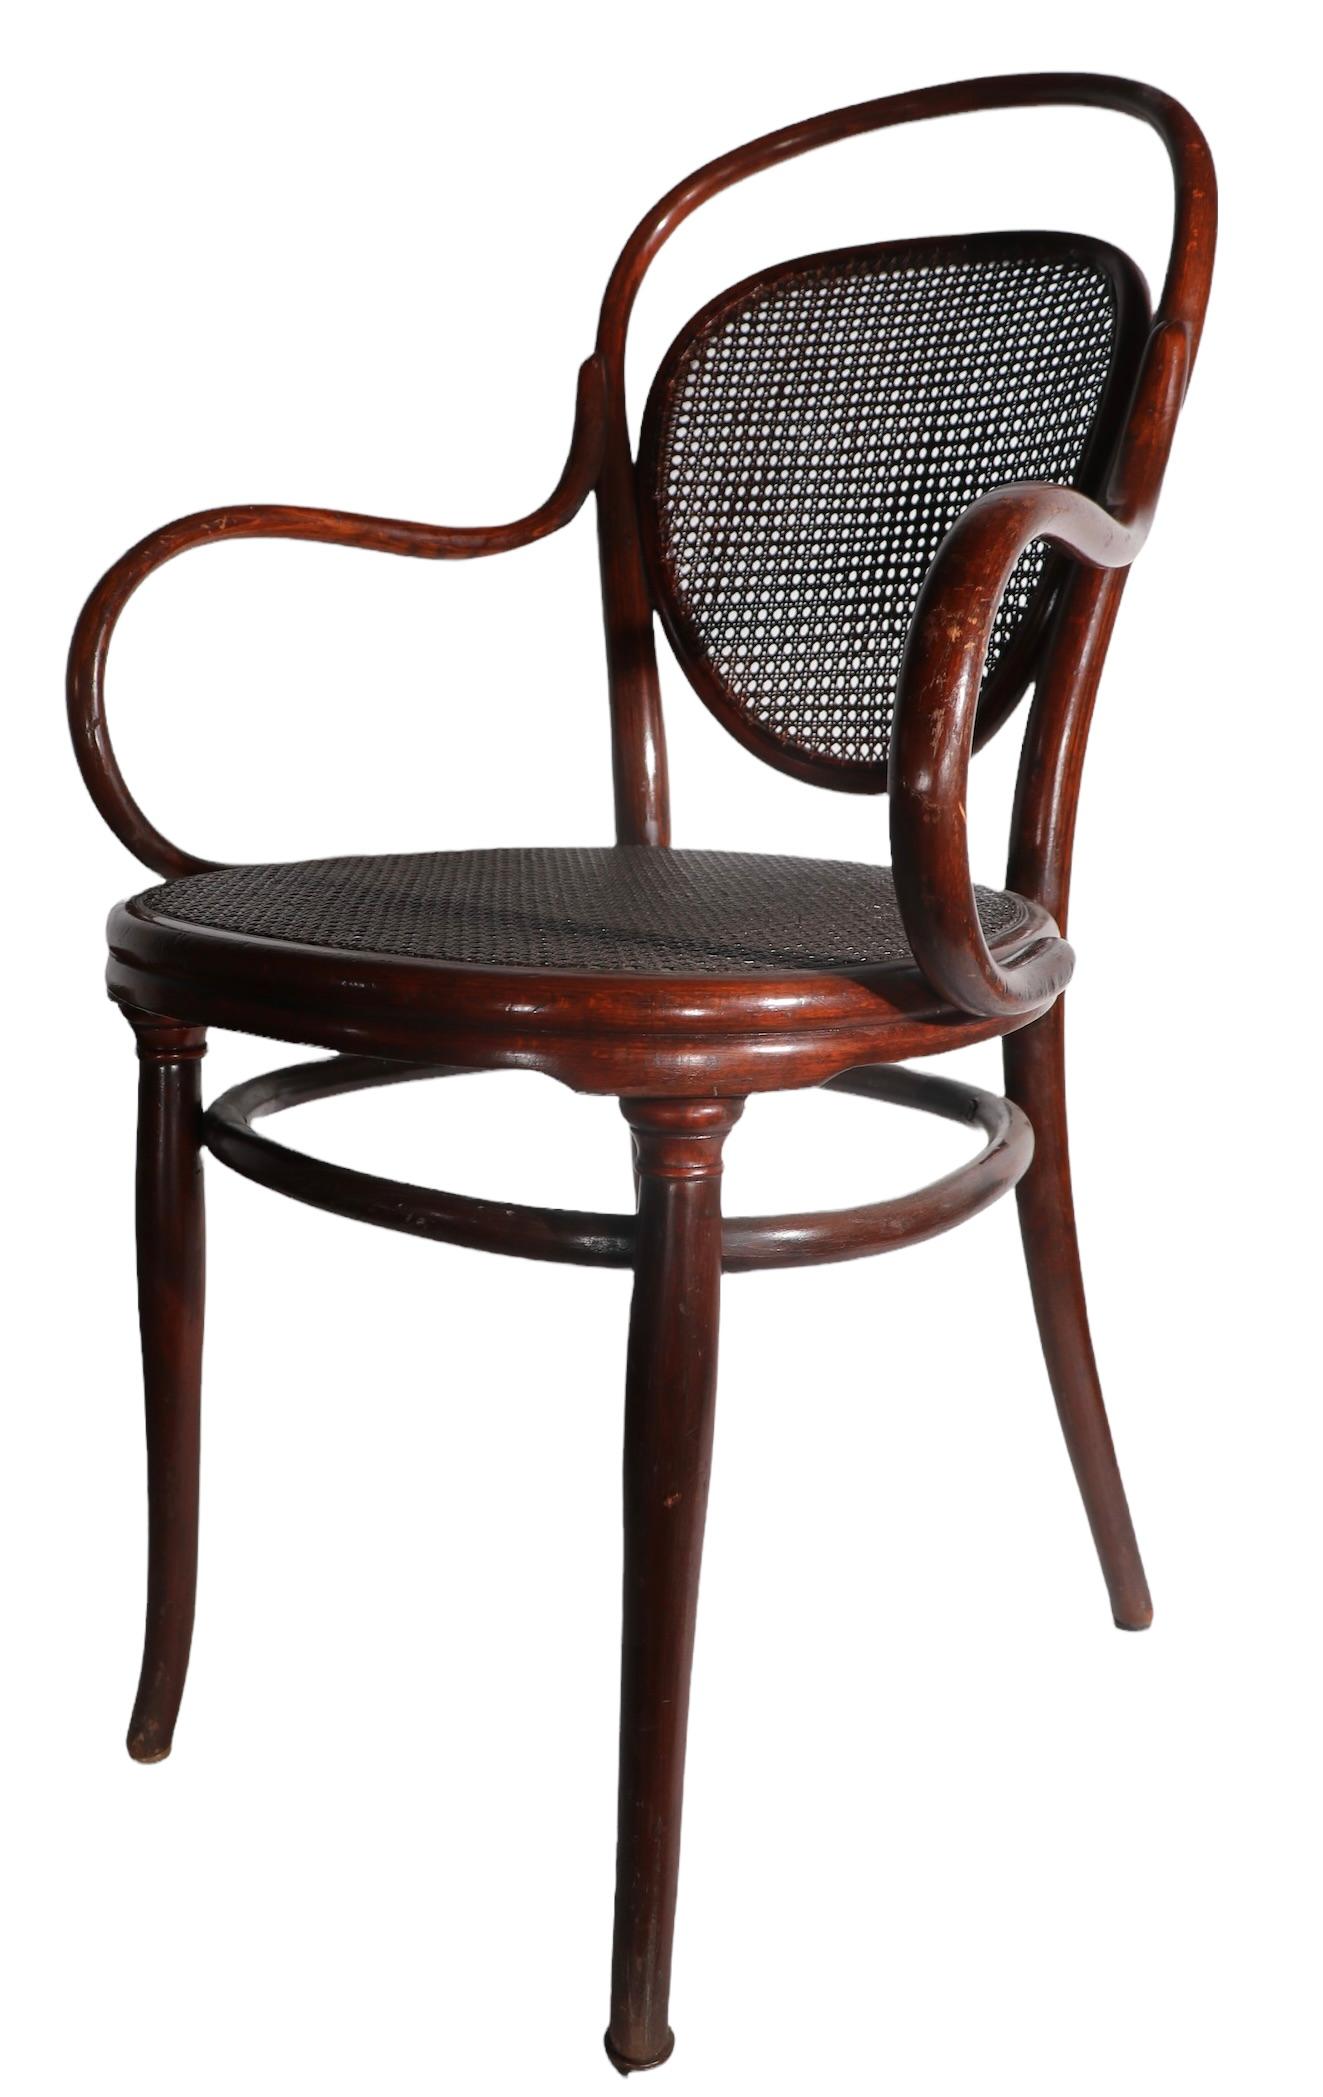 Cane Vienna Secessionist Bentwood Arm Chair Att. to J & J Kohn in the Style of Thonet